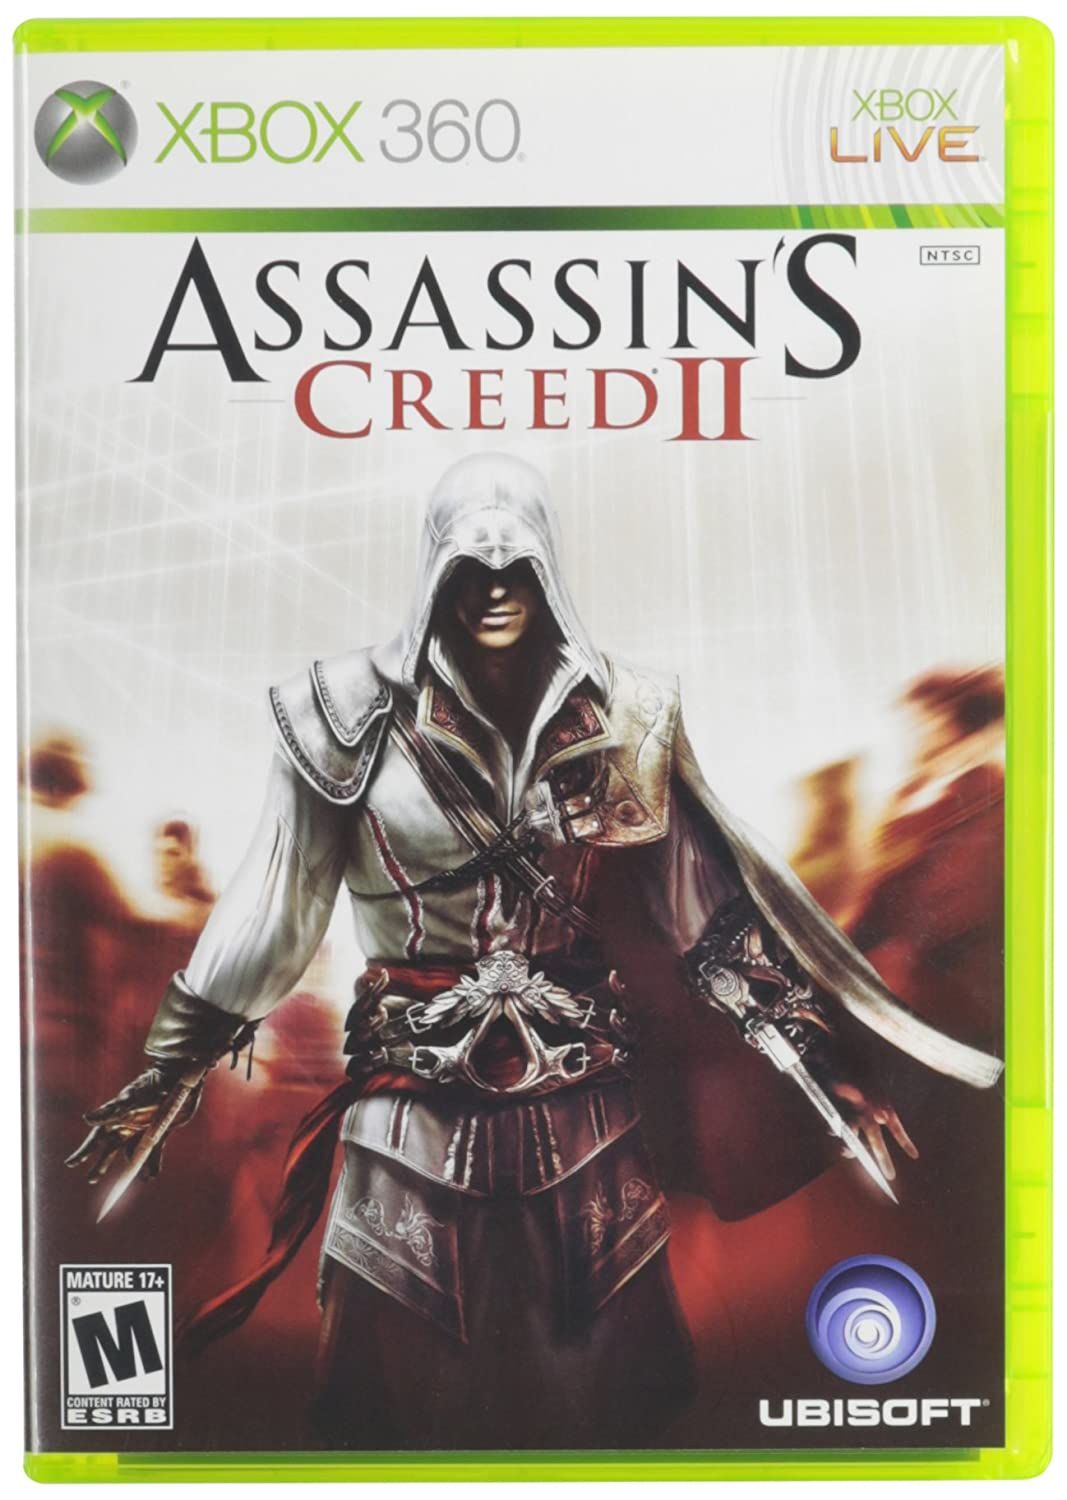 Assassin's Creed II Video Game